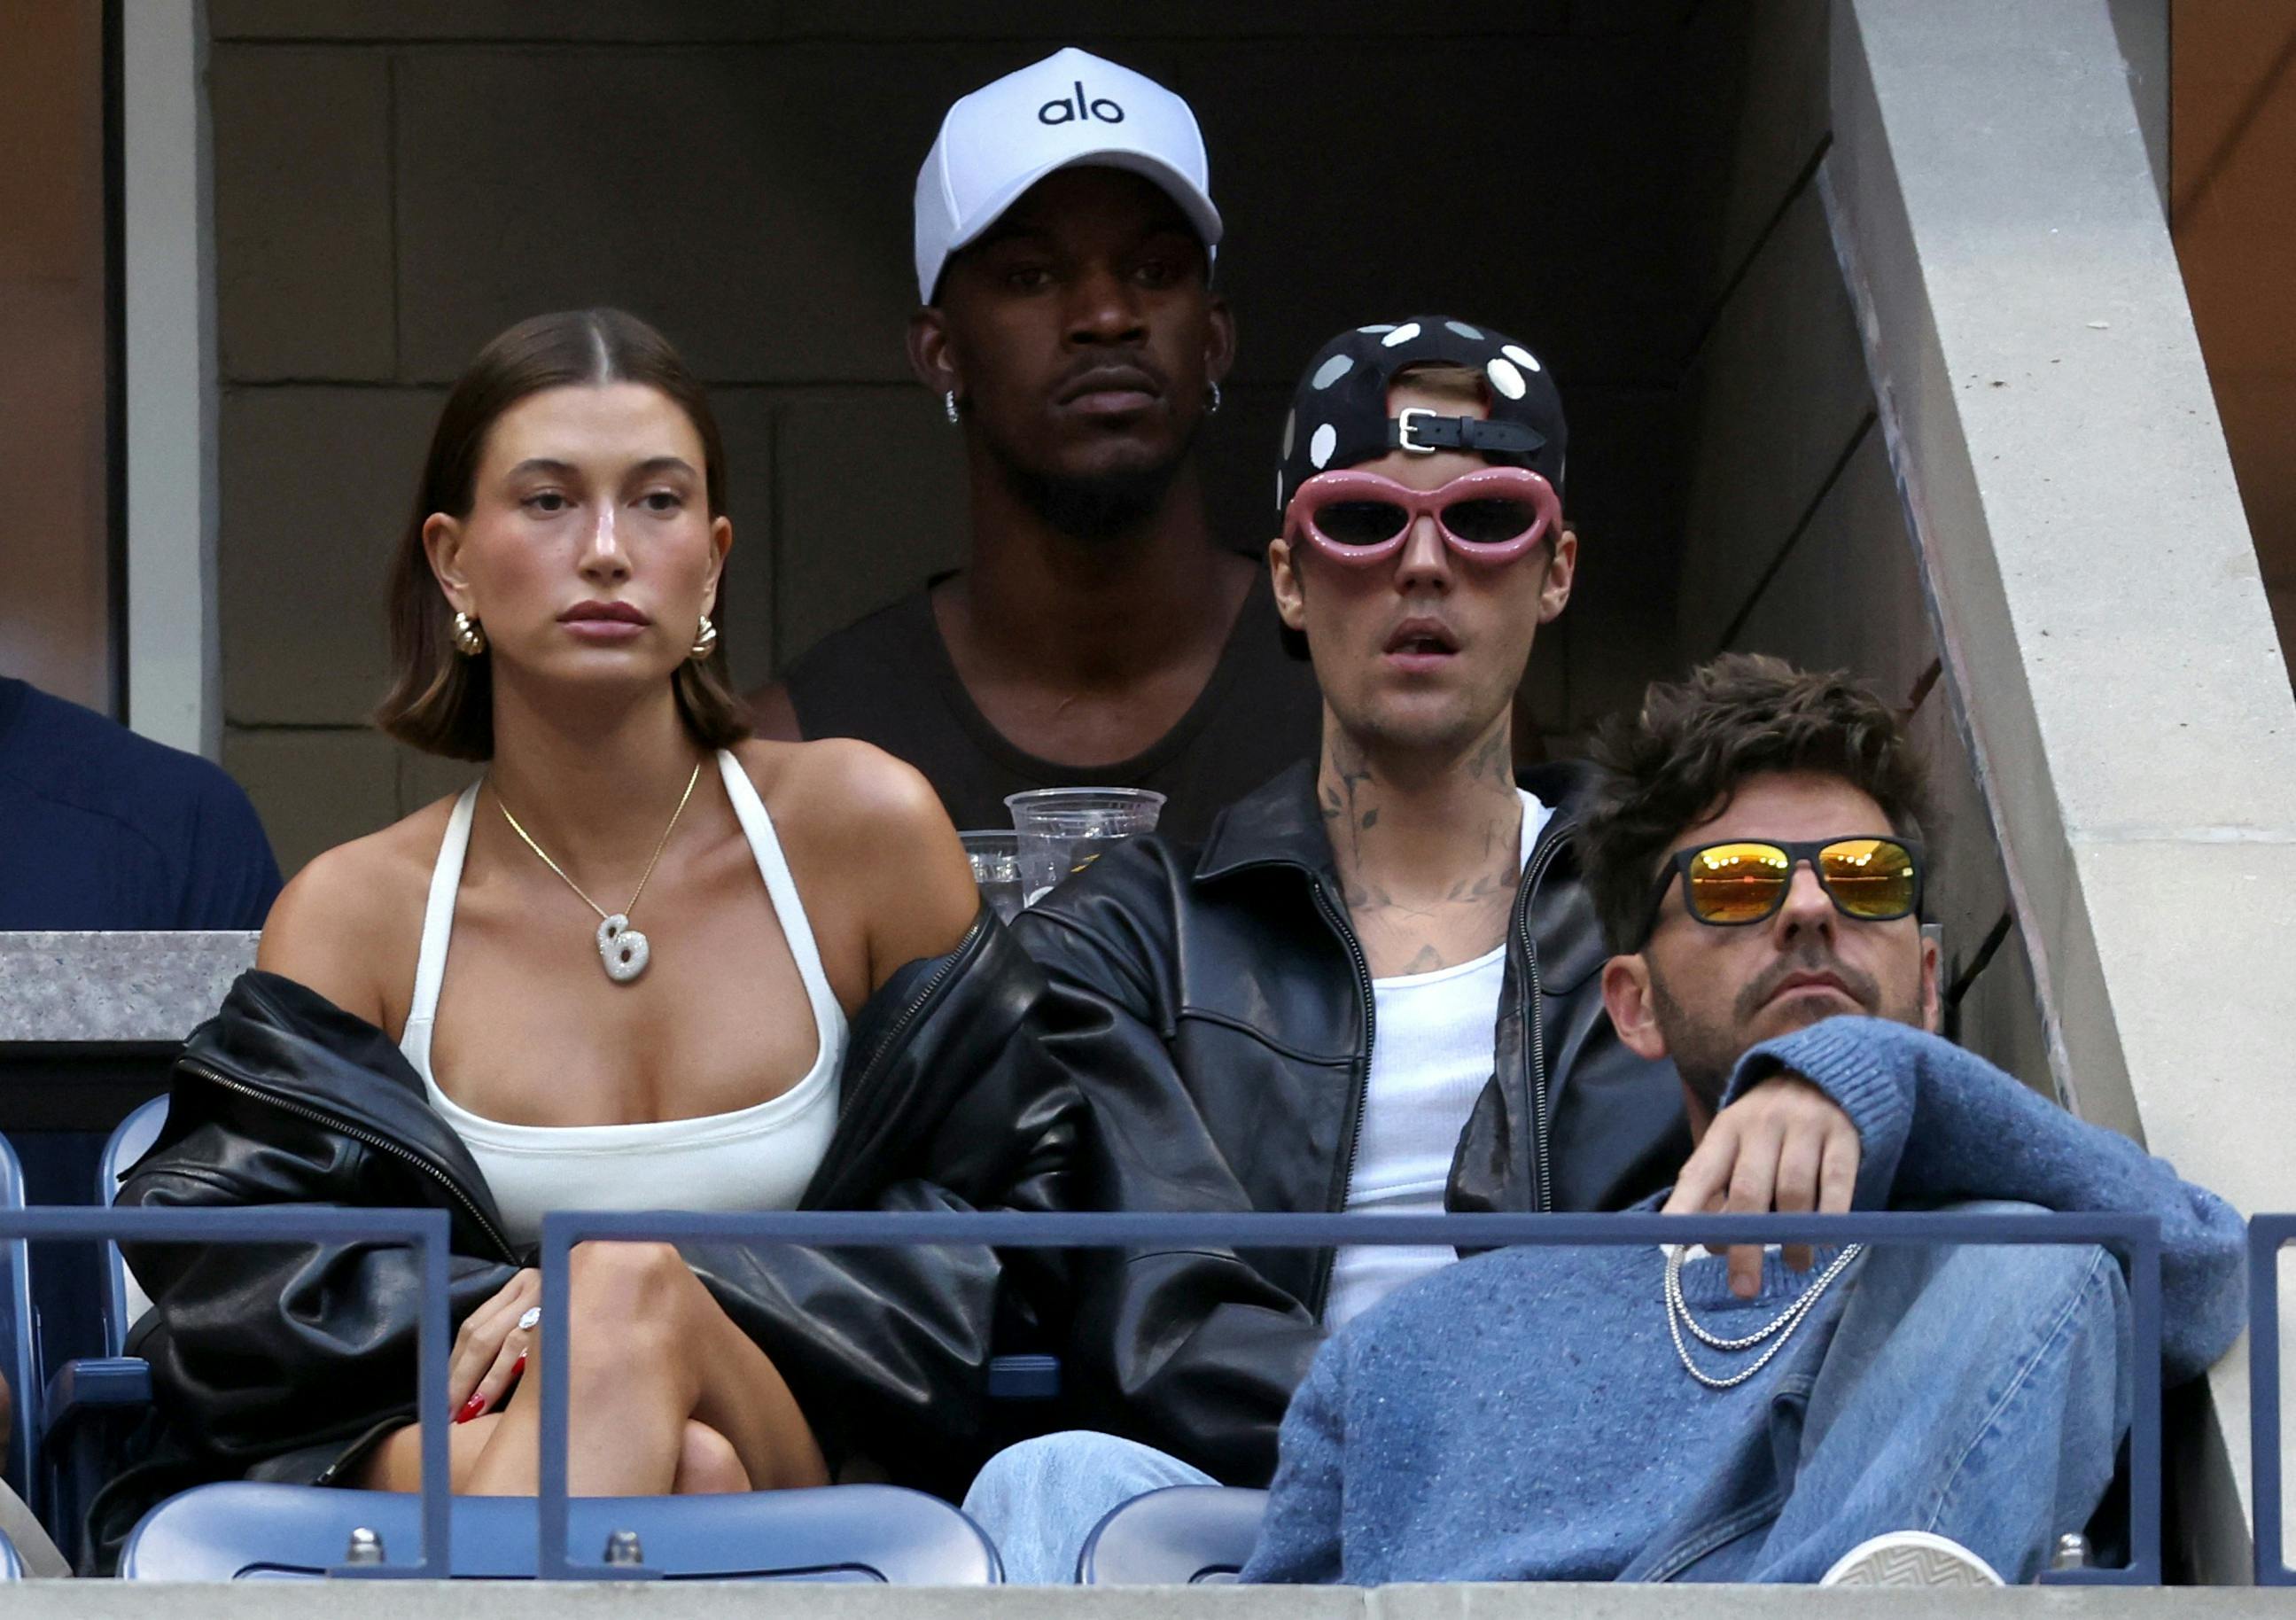 Tennis - U.S. Open - Flushing Meadows, New York, United States - September 1, 2023 Justin Bieber with his wife Hailey Bieber and NBA player Jimmy Butler watch the third round match between Coco Gauff of the U.S. and Belgium's Elise Mertens REUTERS/Shannon Stapleton TPX IMAGES OF THE DAY